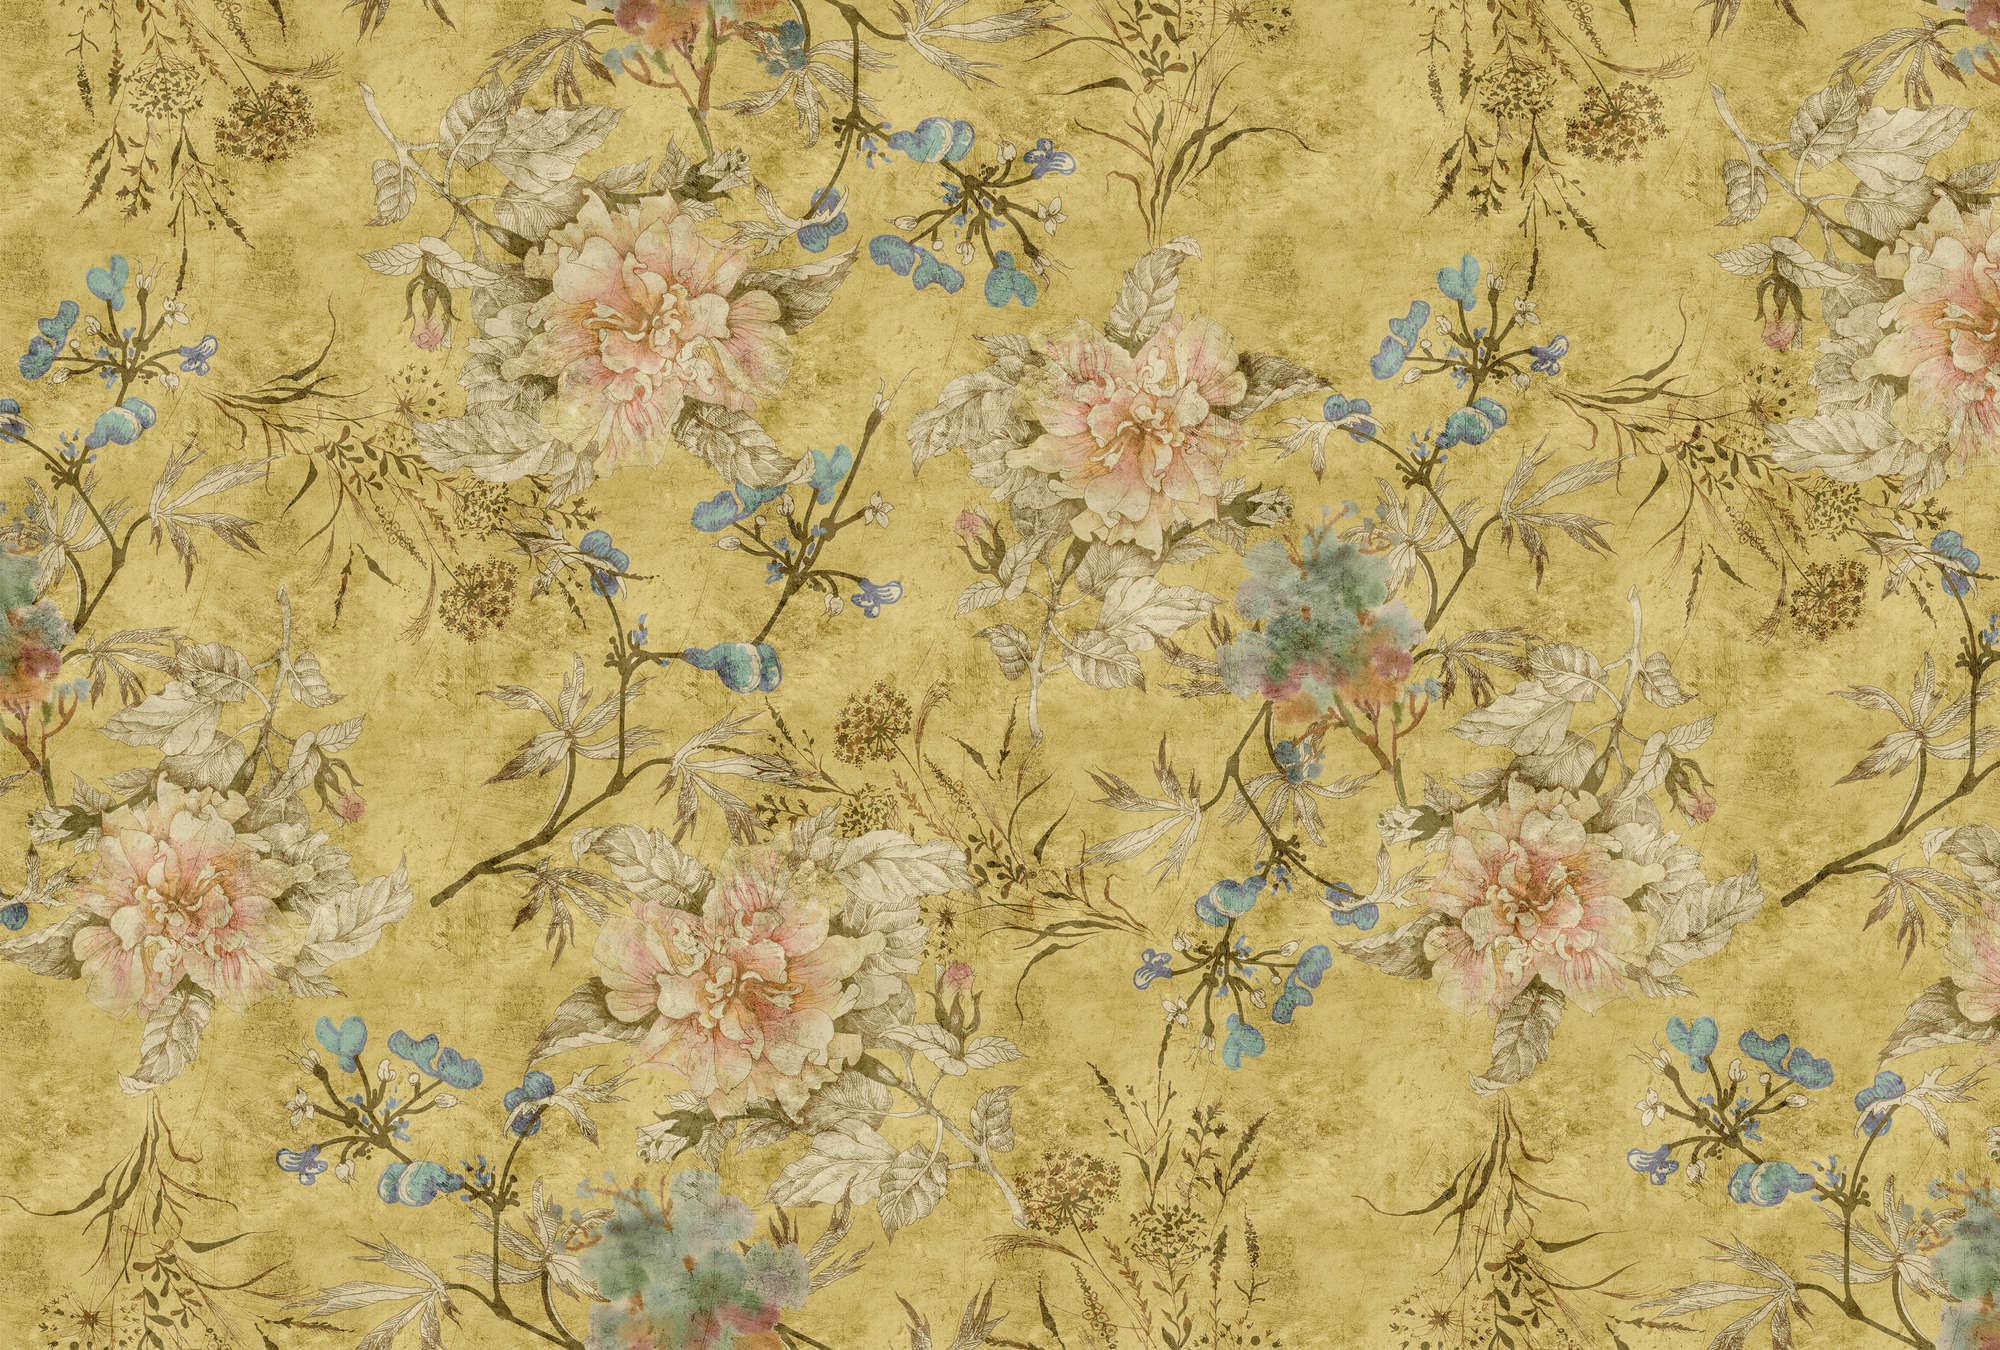             Tenderblossom 2 - Vintage Look Floral Wallpaper- Scratch Texture - Yellow | Pearl Smooth Non-woven
        